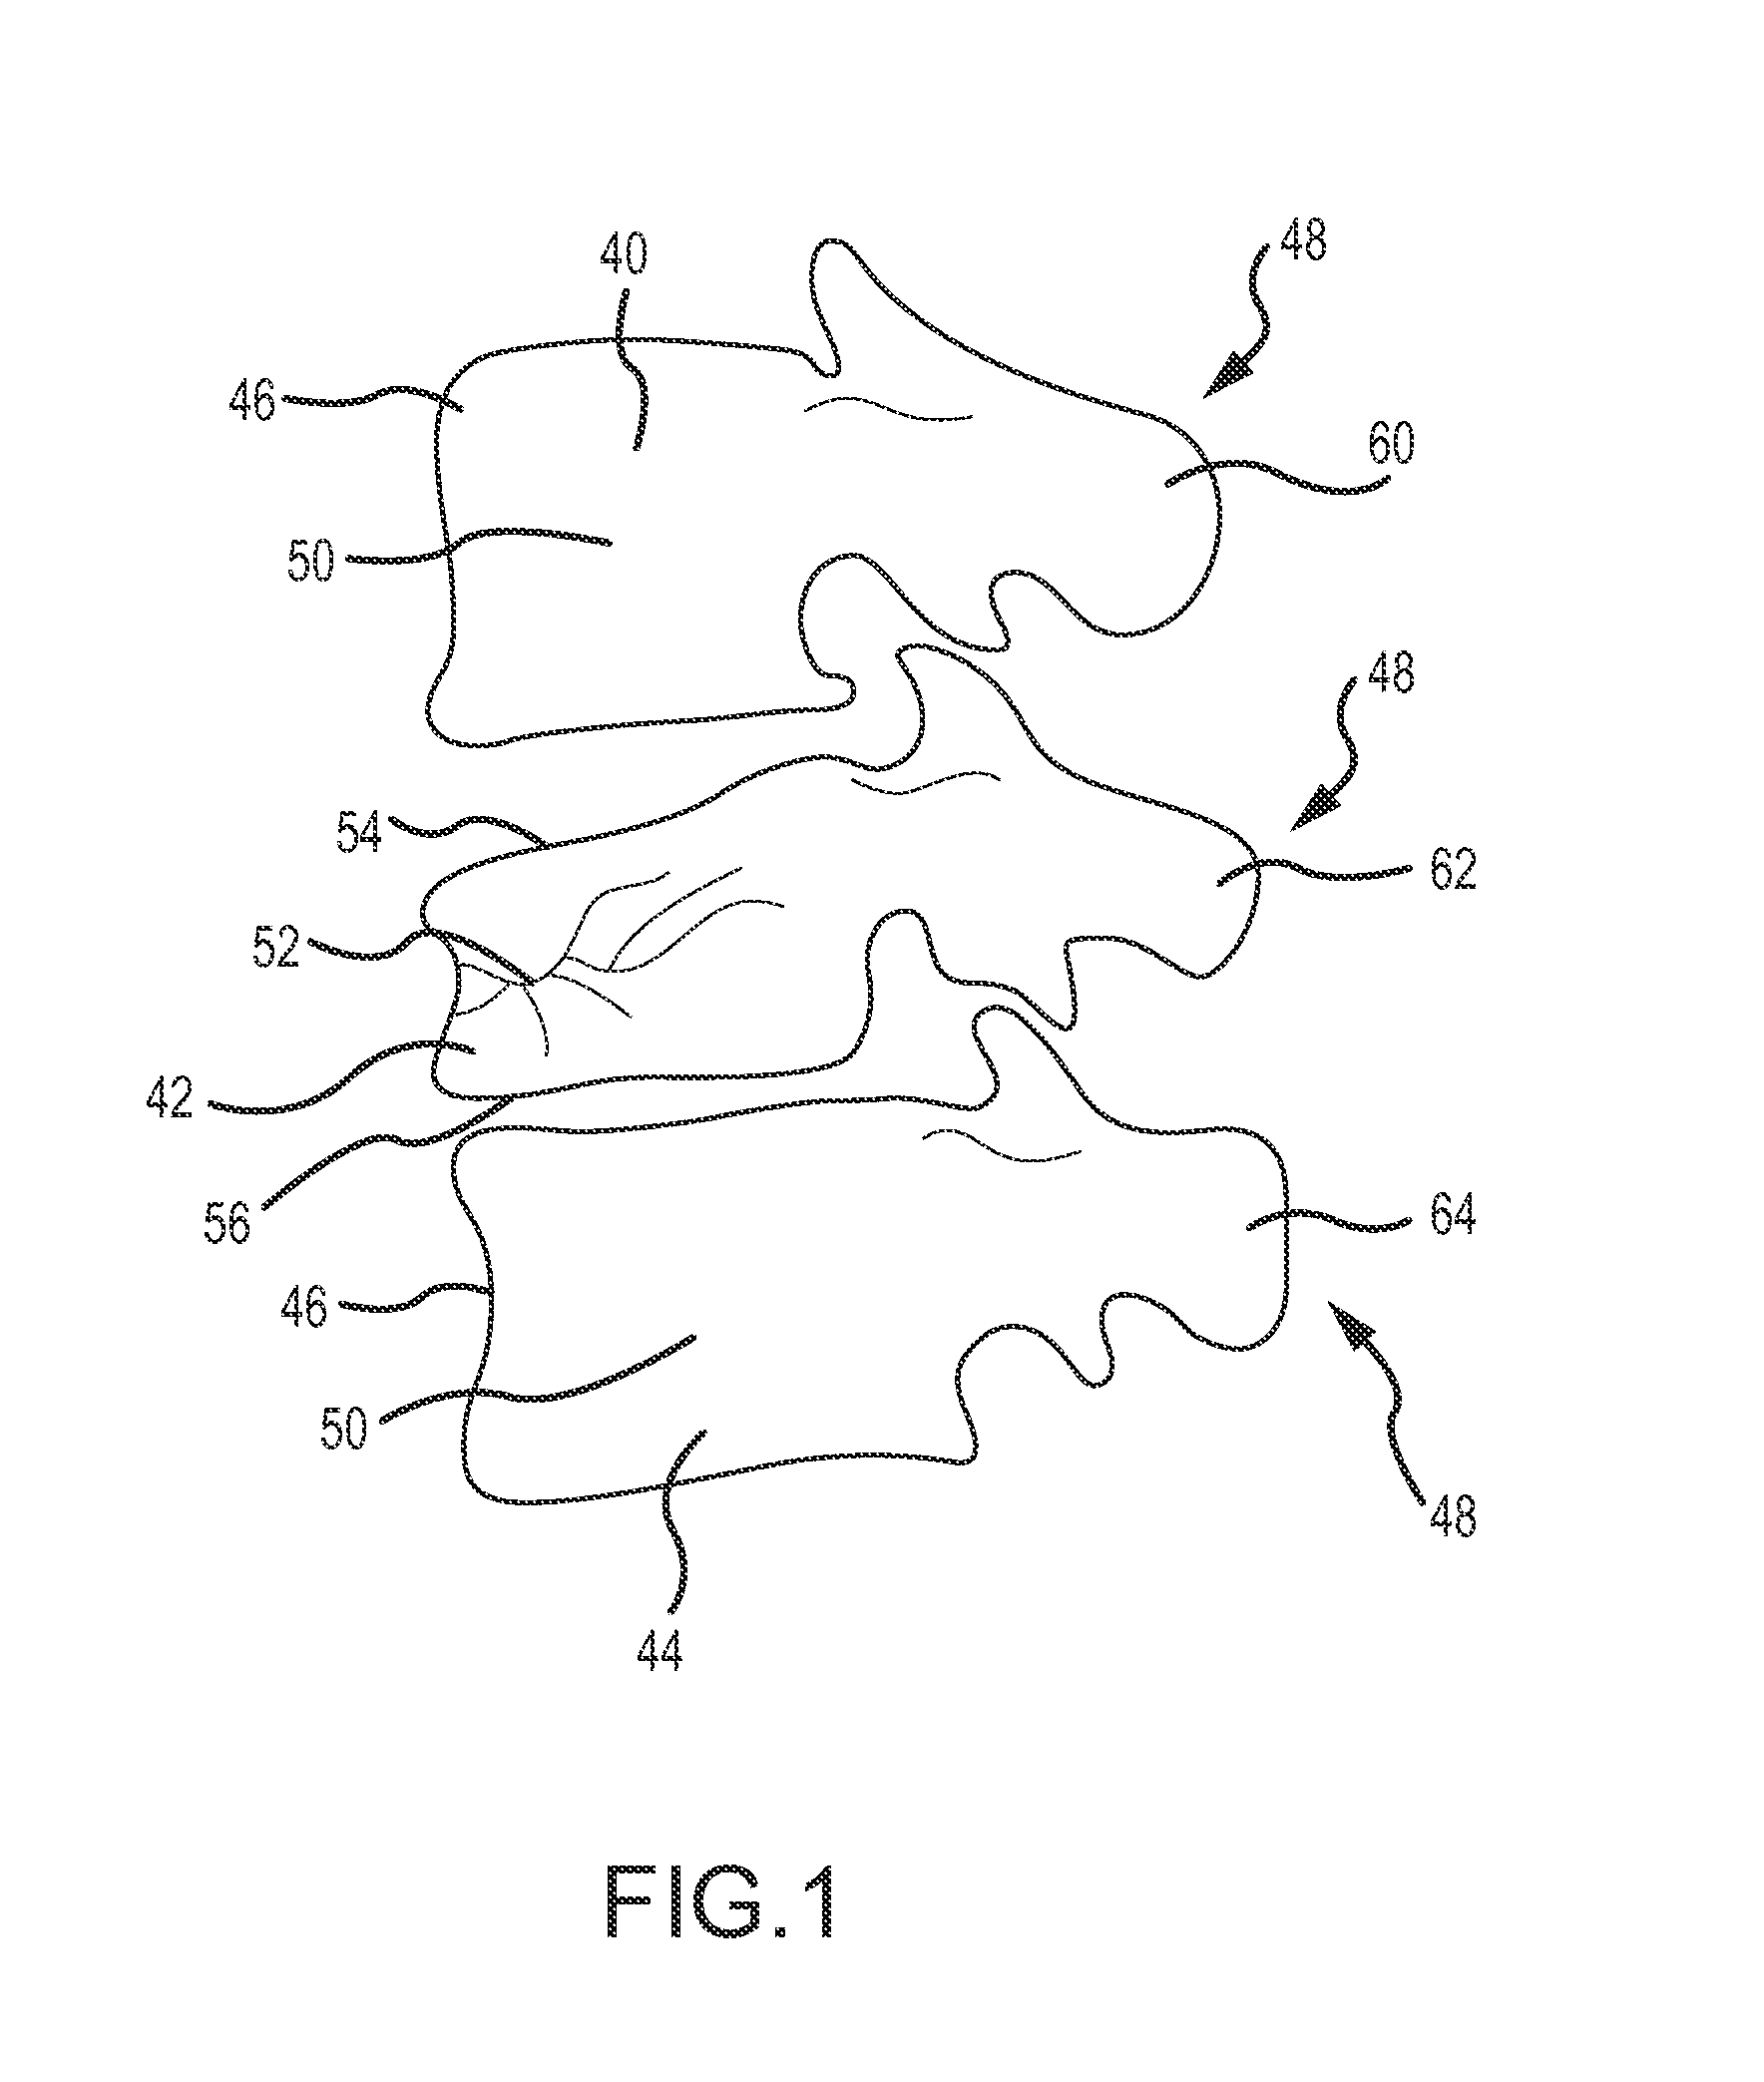 Methods for compression fracture treatment with spinous process fixation systems